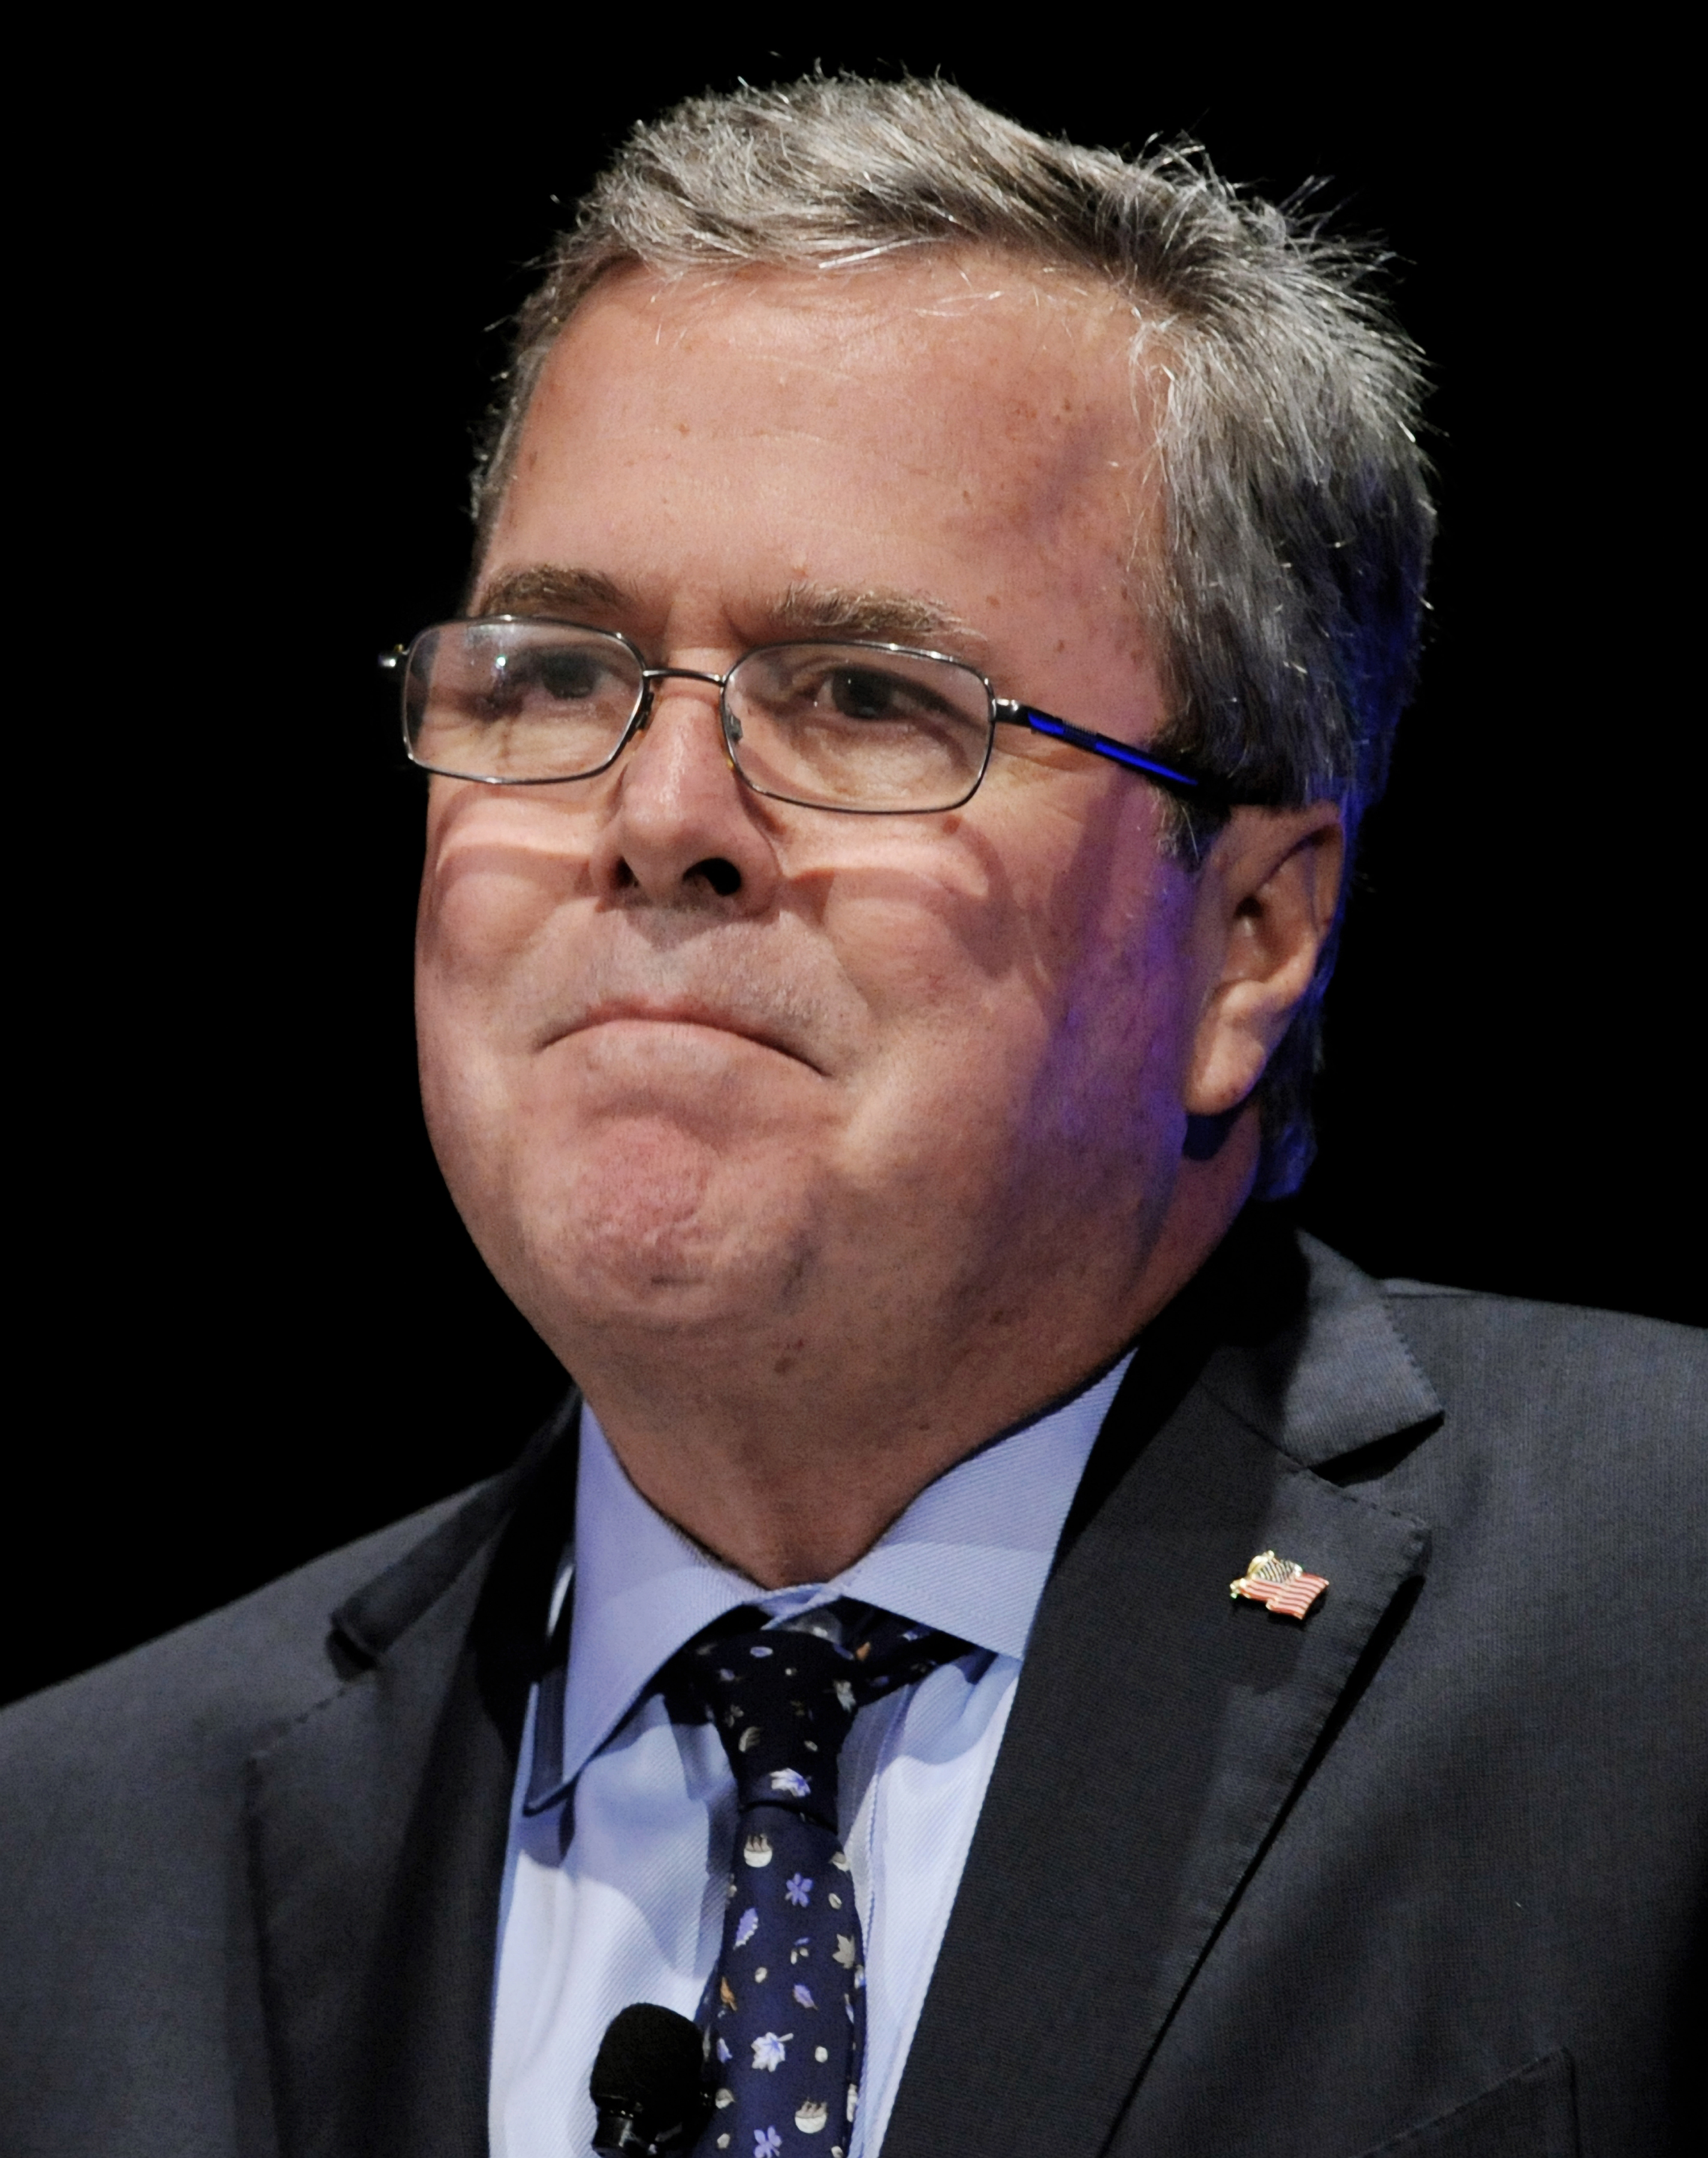 Jeb Bush, former governor of Florida, speaks at the World Business Forum in New York, U.S., on Oct. 1, 2013. (Peter Foley—Bloomberg/Getty Images)